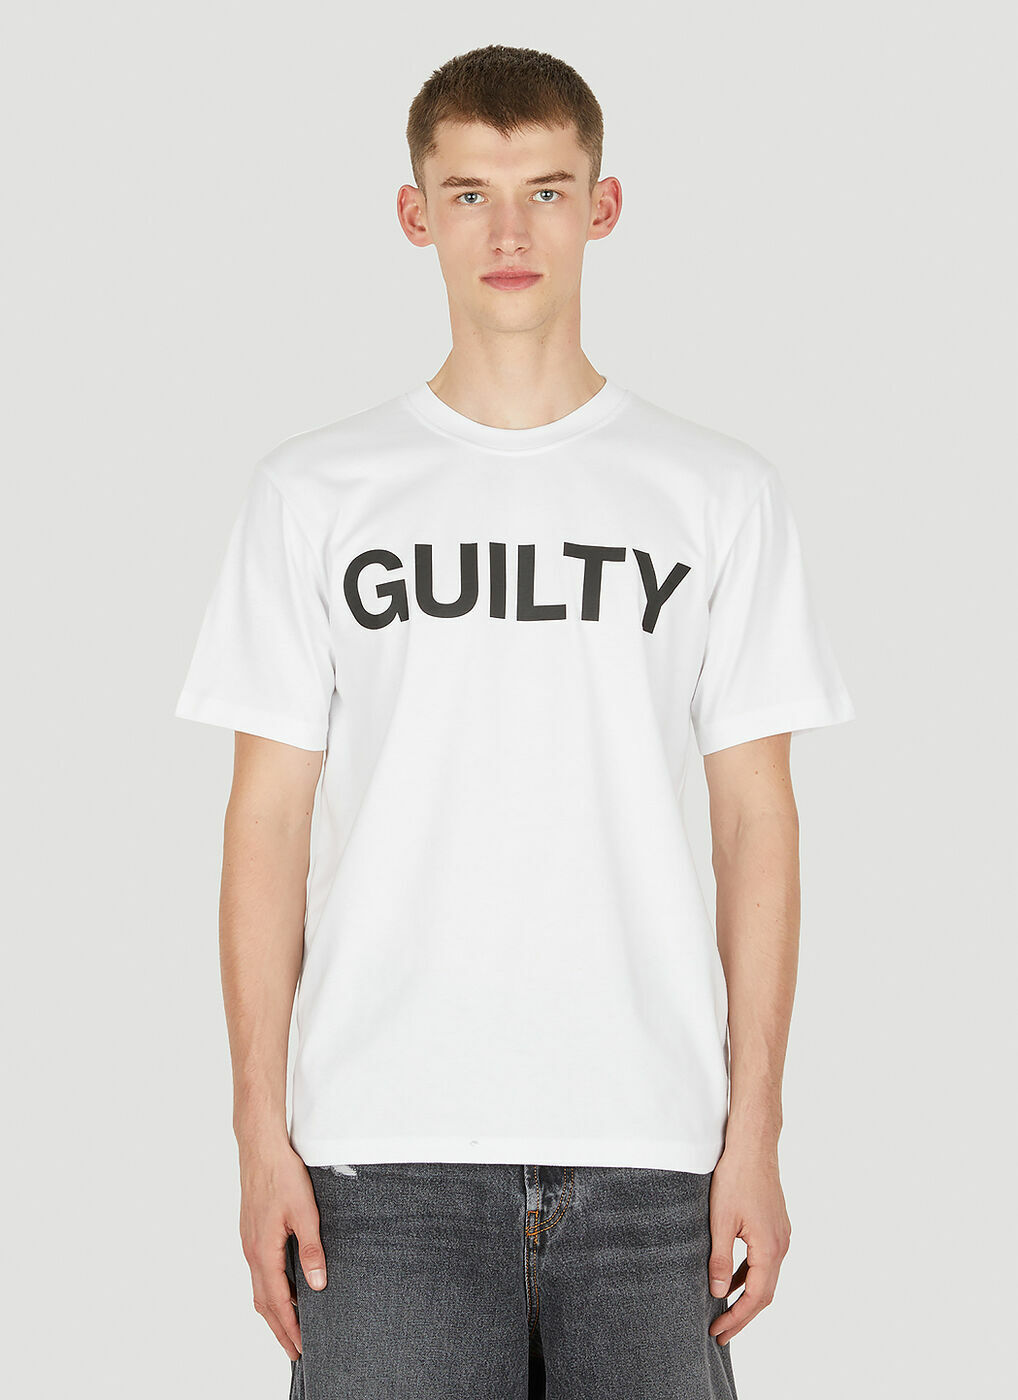 Guilty T-Shirt in White